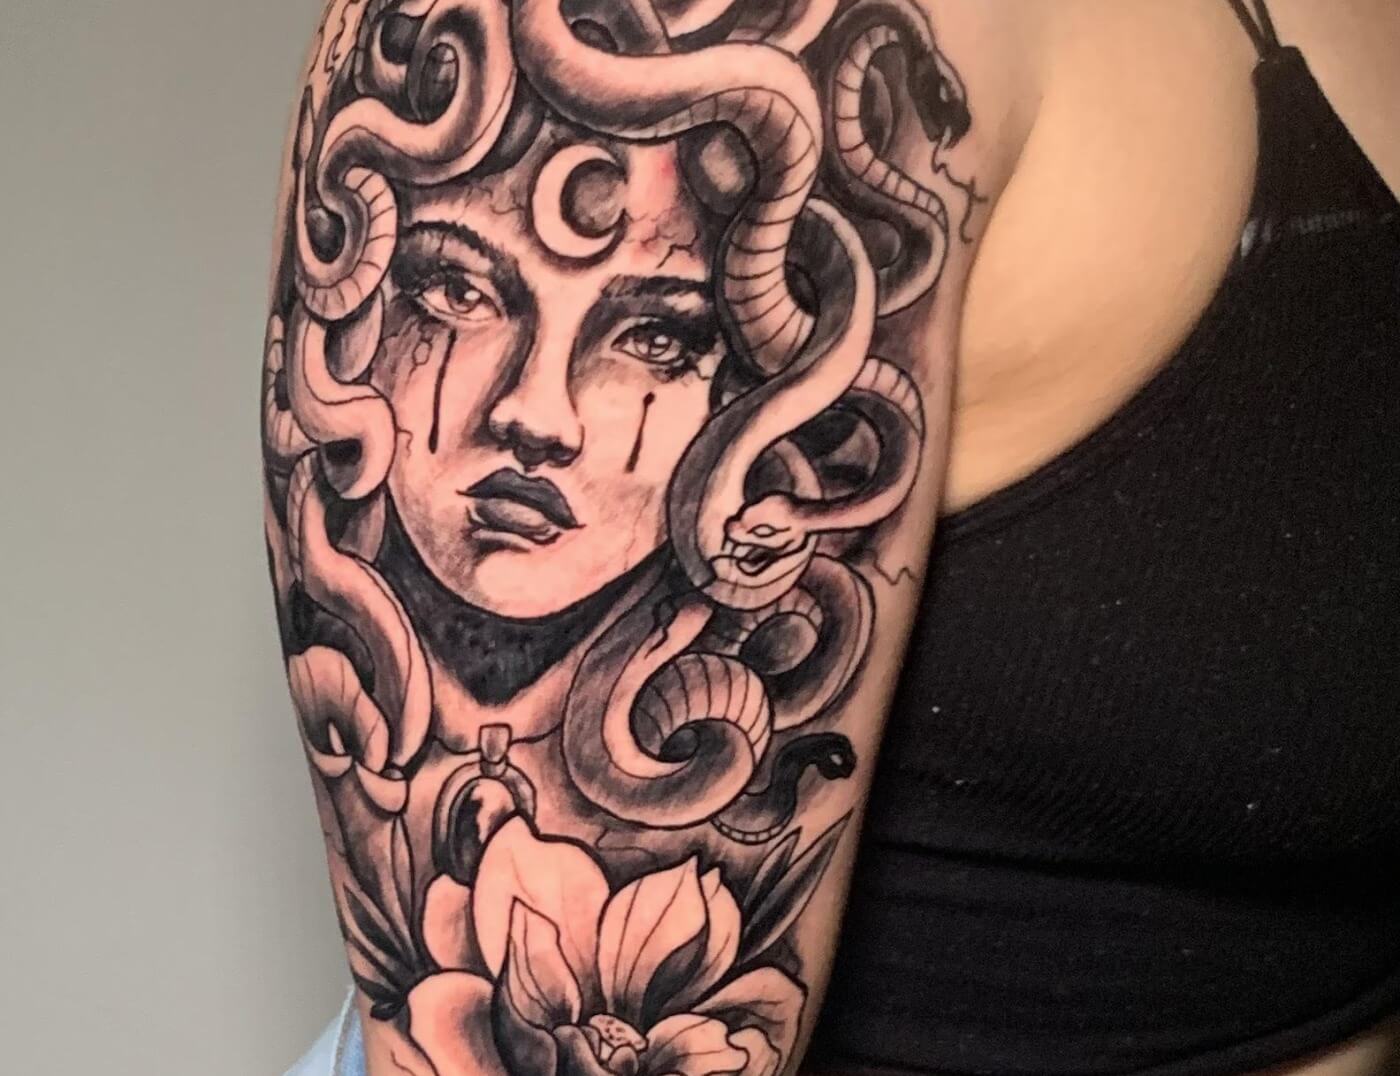 Muslim Medusa Portrait Black & Grey Tattoo With Flowers & Crescent Moon IBy J.R. Outlaw of Iron Palm Tattoos & Body Piercing in south downtown Atlanta. We're open late night until 2AM for tattoos. Call 404-973-7828 or stop by for a free consultation with JR Outlaw.